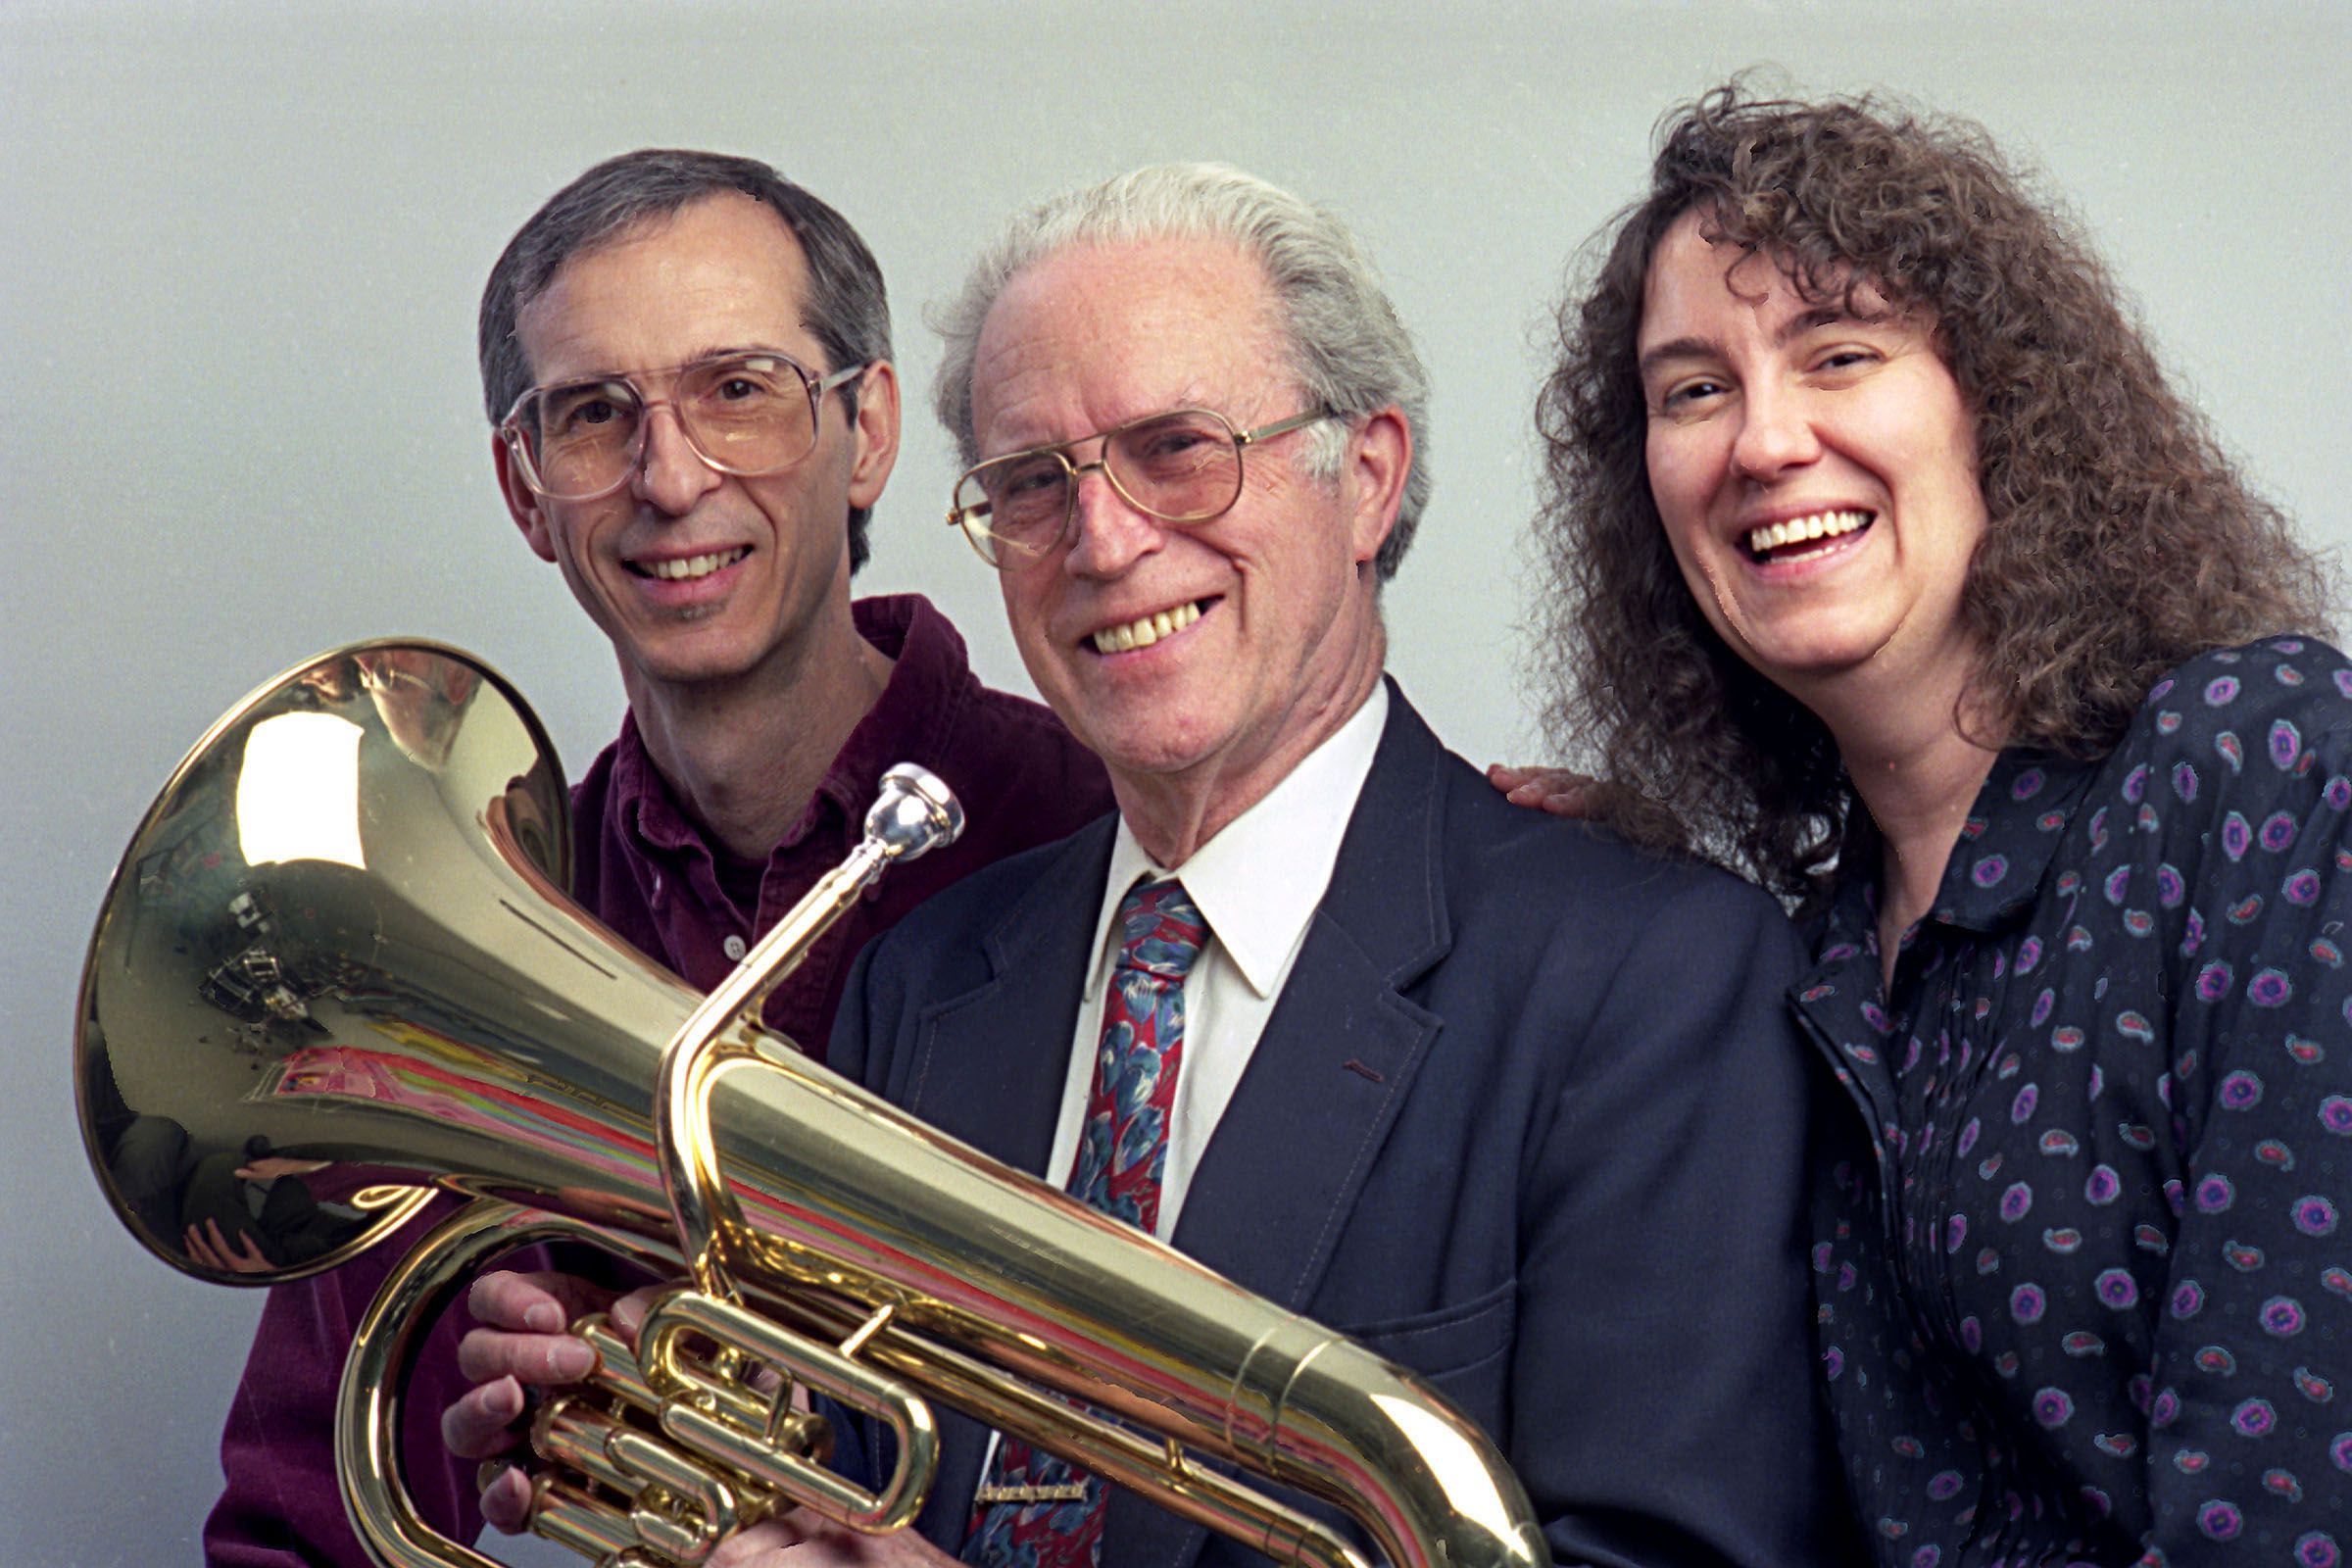 Photographed on March 7, 1994, Richard Ellis, center, started Ellis Music Co. Inc. in 1946. The company president is his son David, left, and its treasurer is his daughter, Joan Bassett. The company, located on Route 107 in Royalton, Vt., rents out more than 10,000 band instruments throughout Vermont and much of New Hampshire. (Valley News - Geoff Hansen) Copyright Valley News. May not be reprinted or used online without permission. Send requests to permission@vnews.com.